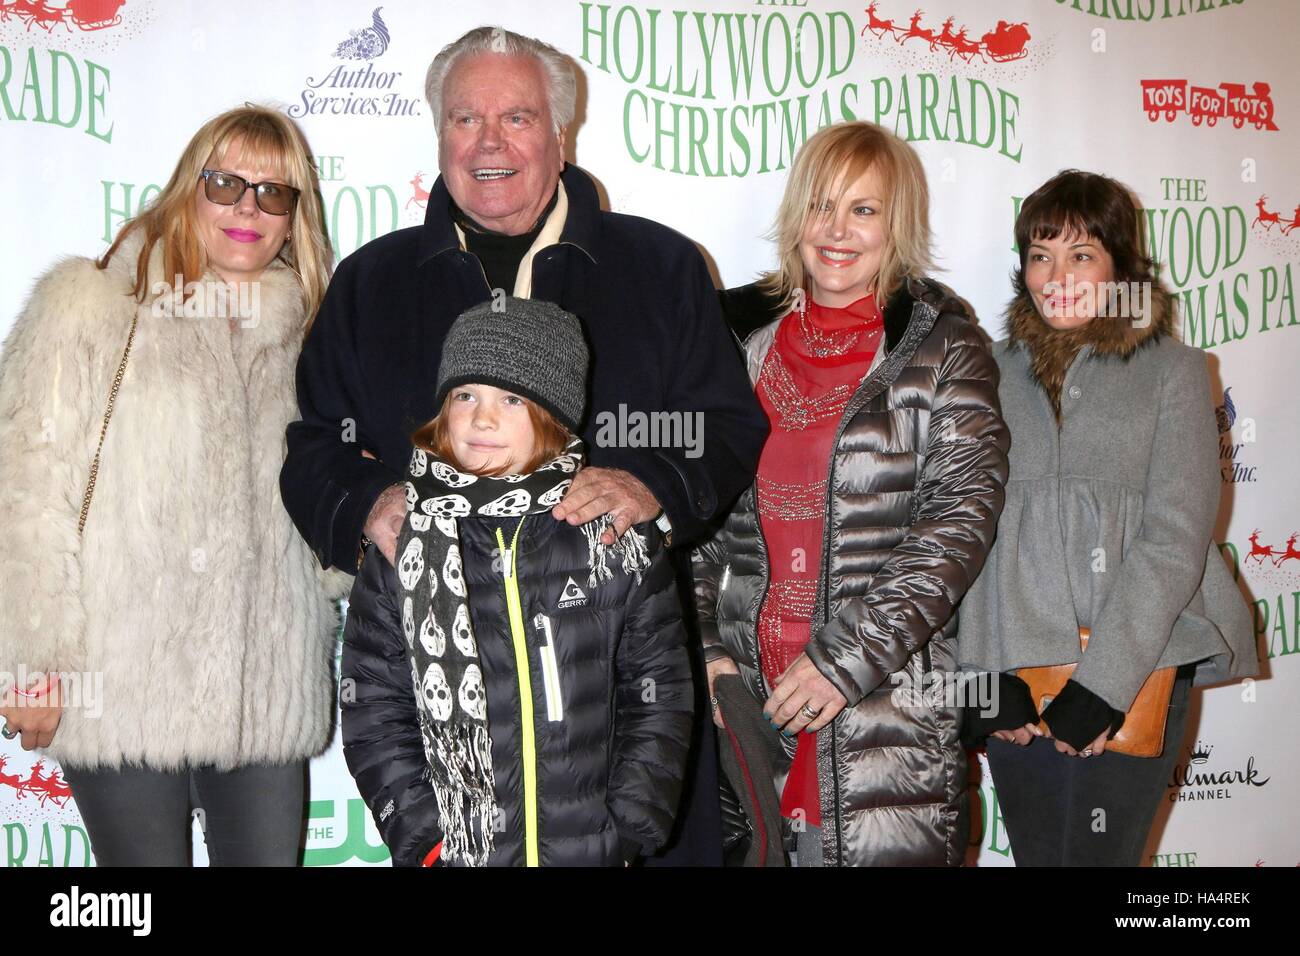 Los Angeles, CA, USA. 27th Nov, 2016. Courtney Brooke Wagner, Robert Wagner, Riley Wagner-Lewis, Katie Wagner, Natasha Gregson Wagner in attendance for The 85th Annual Hollywood Christmas Parade, Hollywood Boulevard, Los Angeles, CA November 27, 2016. Credit:  Priscilla Grant/Everett Collection/Alamy Live News Stock Photo